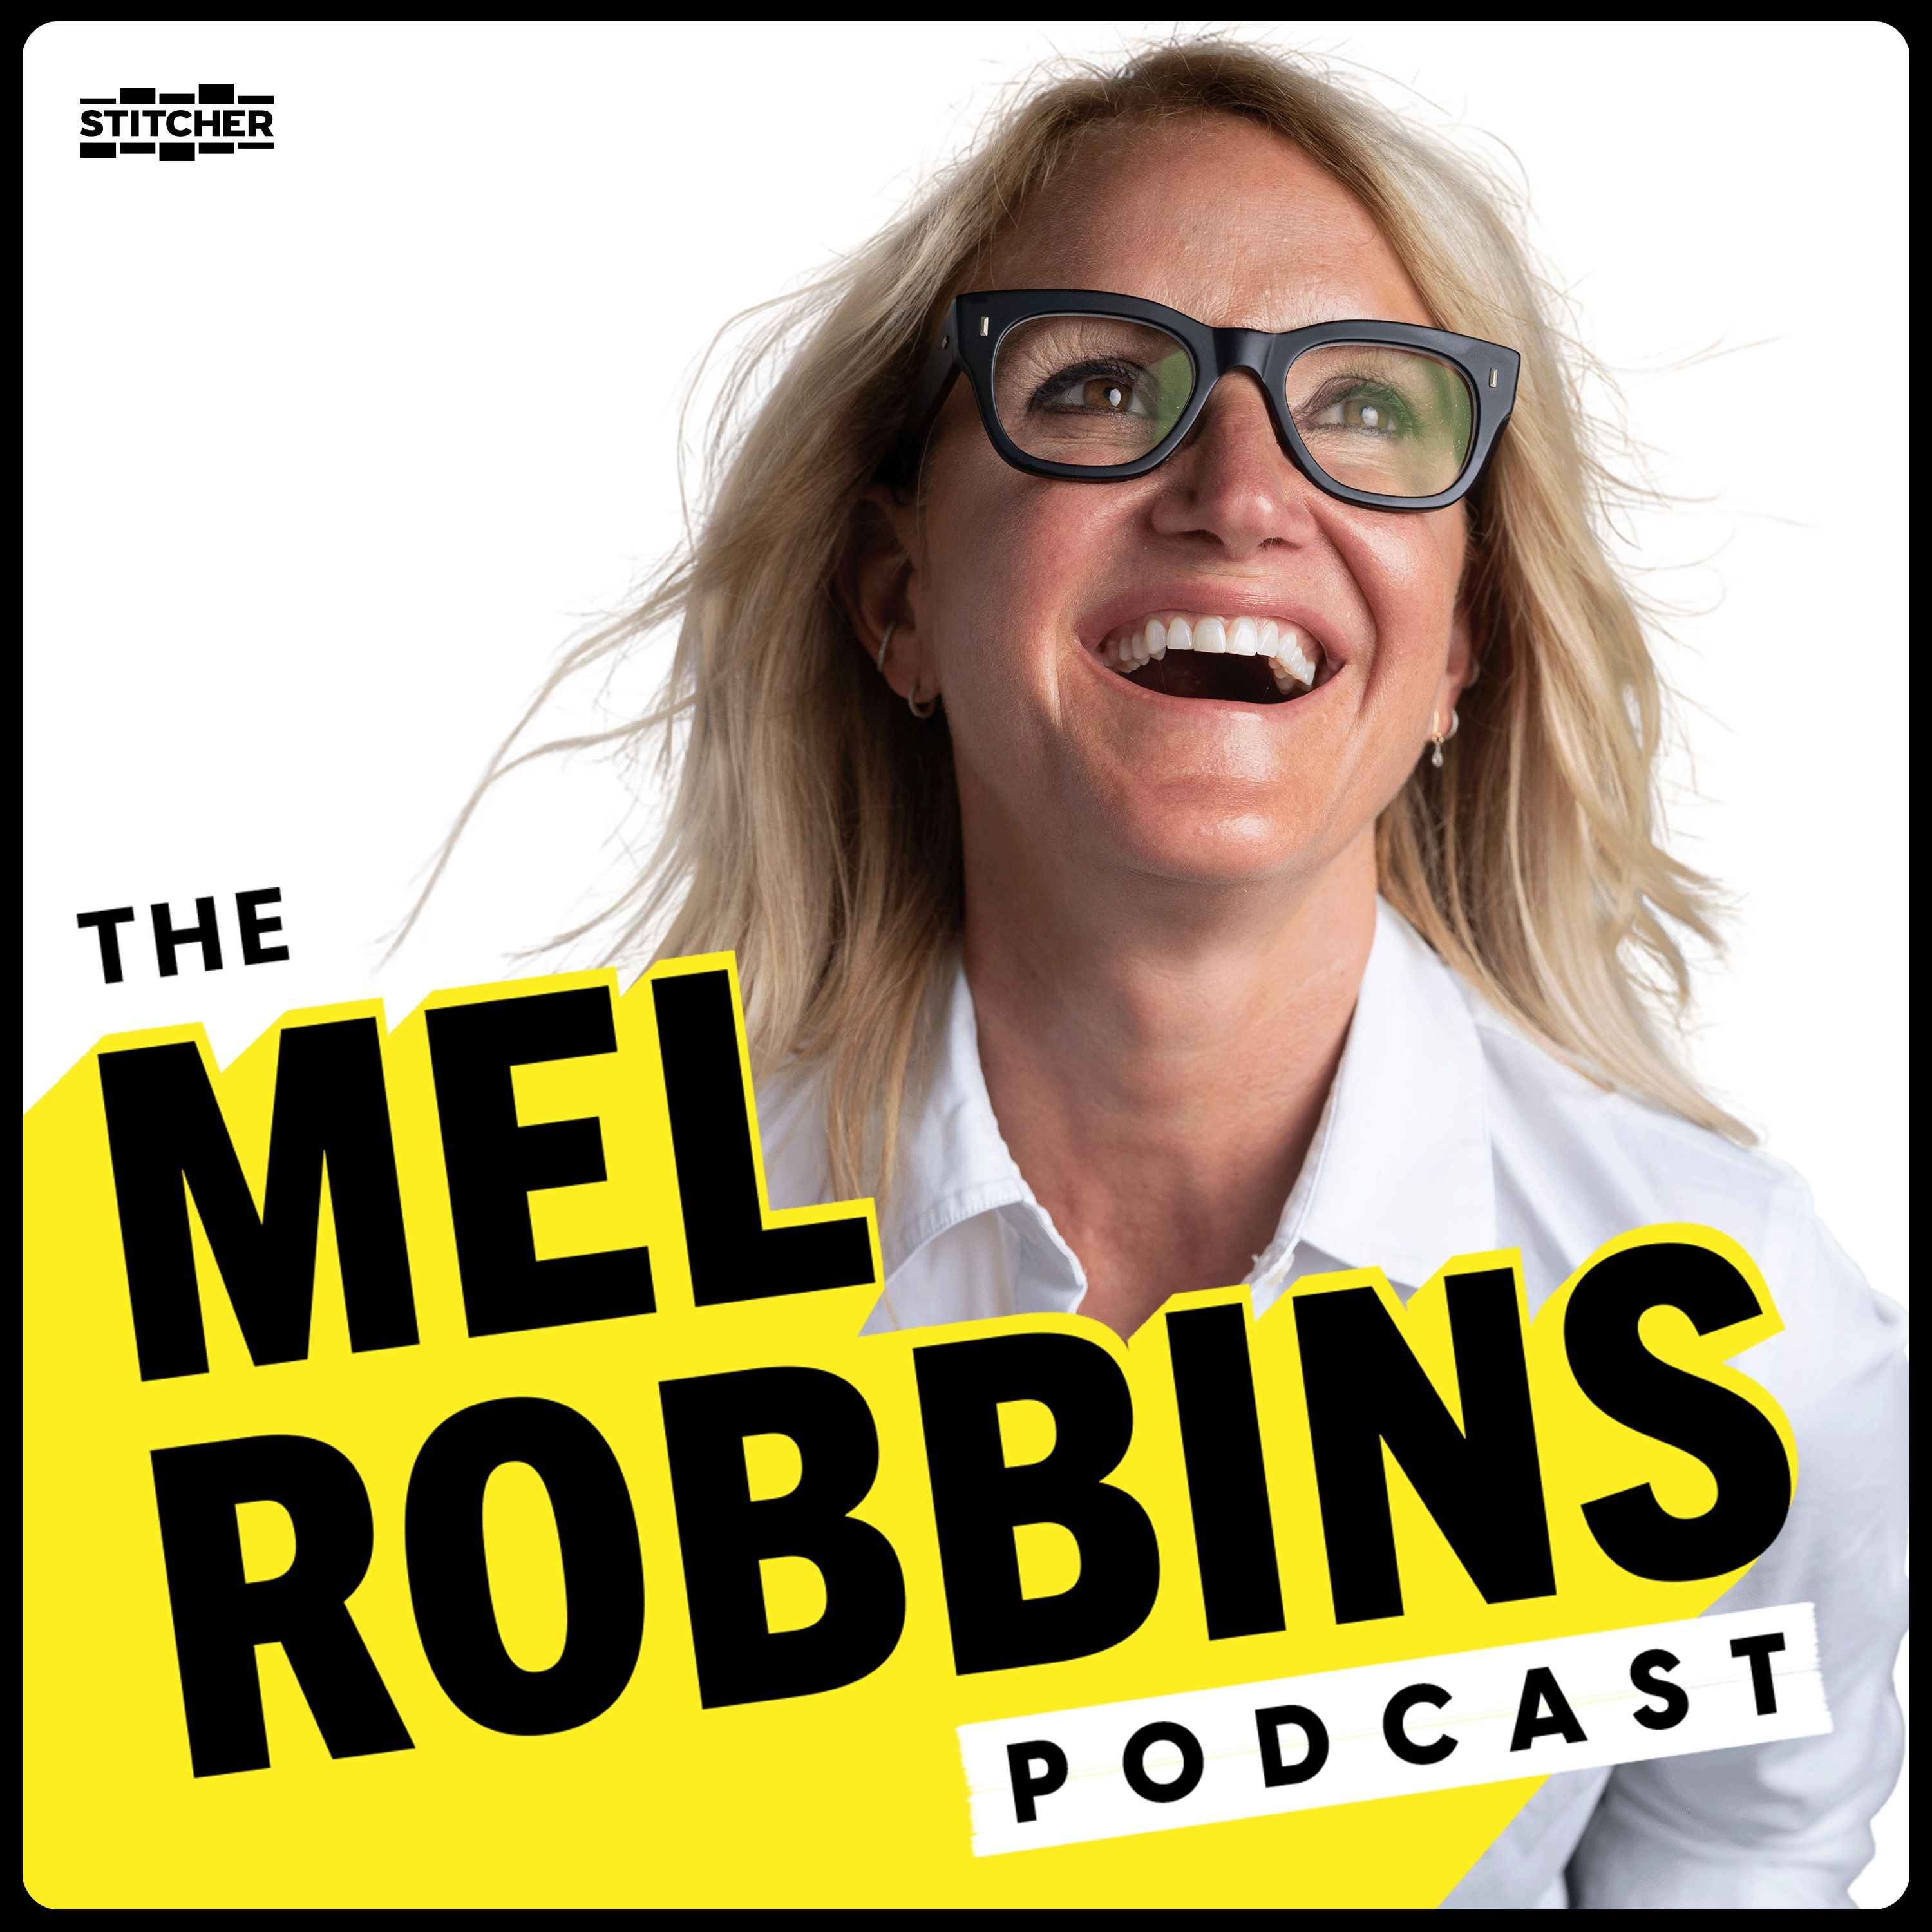 Realizing a Good Morning Begins the Night Before Changed Mel Robbins' Life